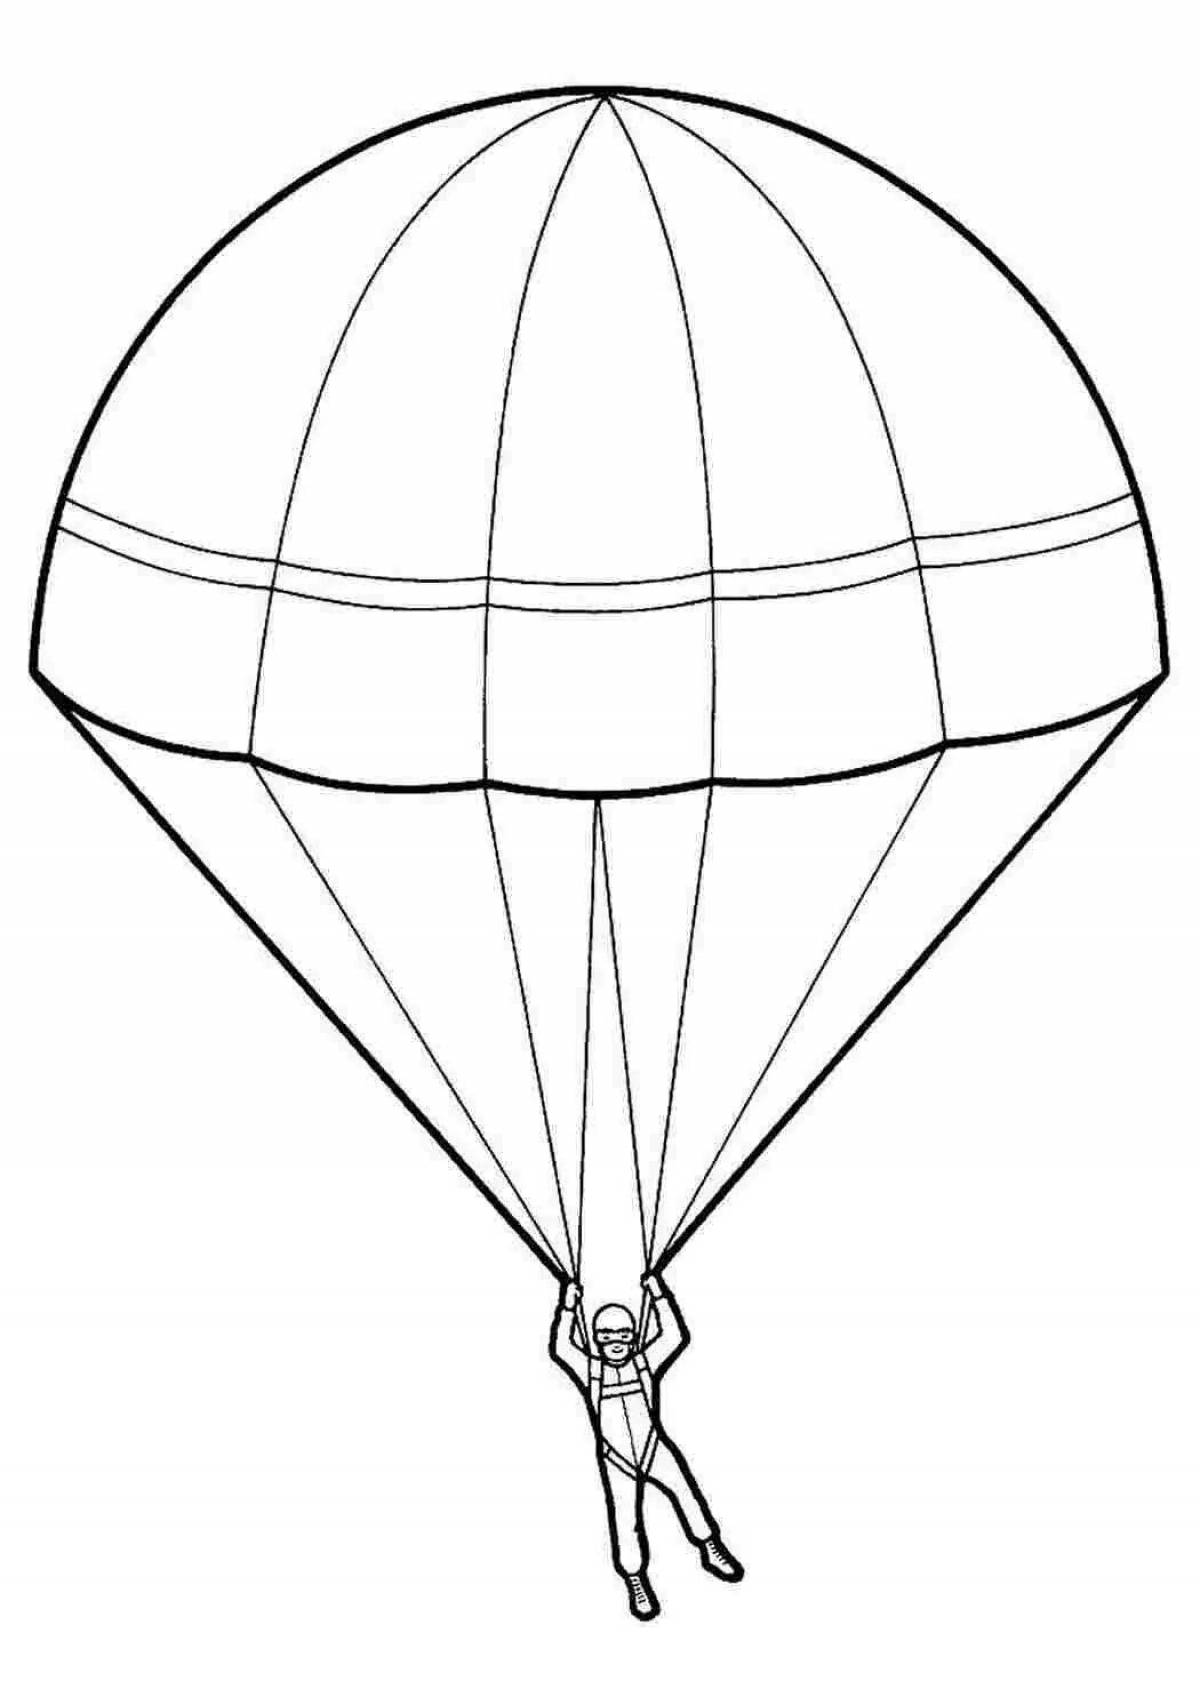 Military parachutist coloring book for kids